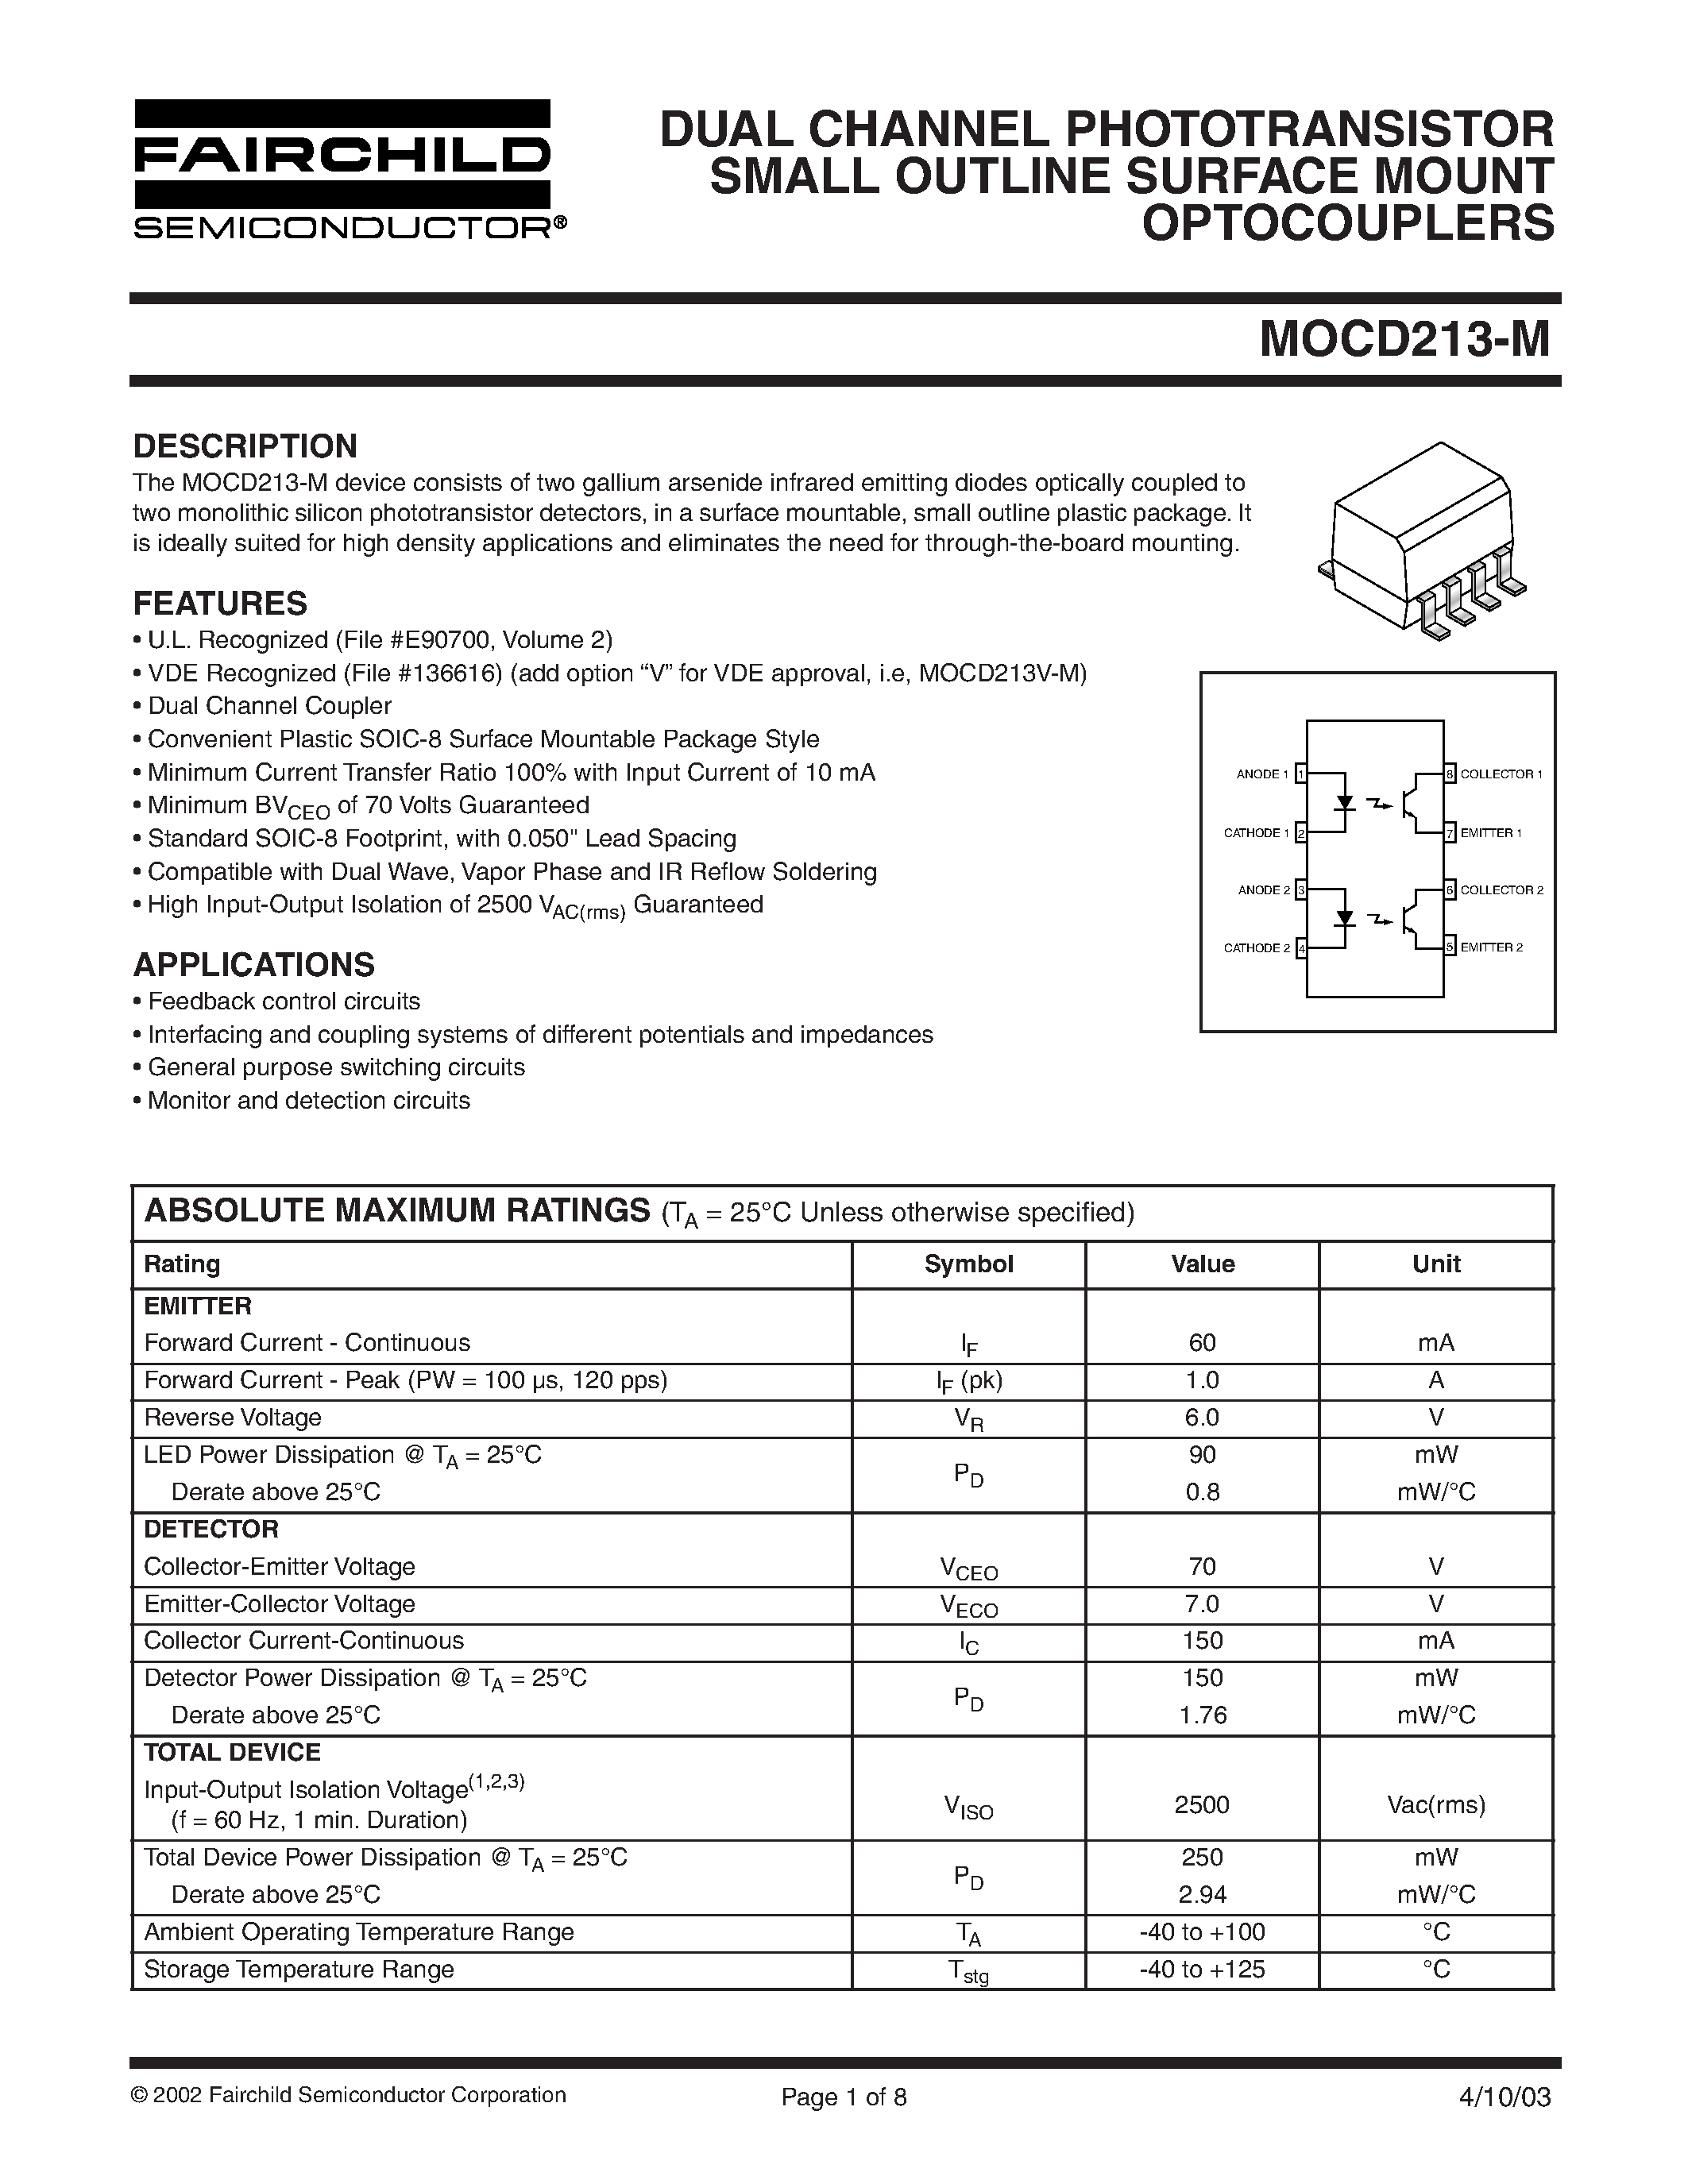 Datasheet MOCD213-M - DUAL CHANNEL PHOTOTRANSISTOR SMALL OUTLINE SURFACE MOUNT OPTOCOUPLERS page 1